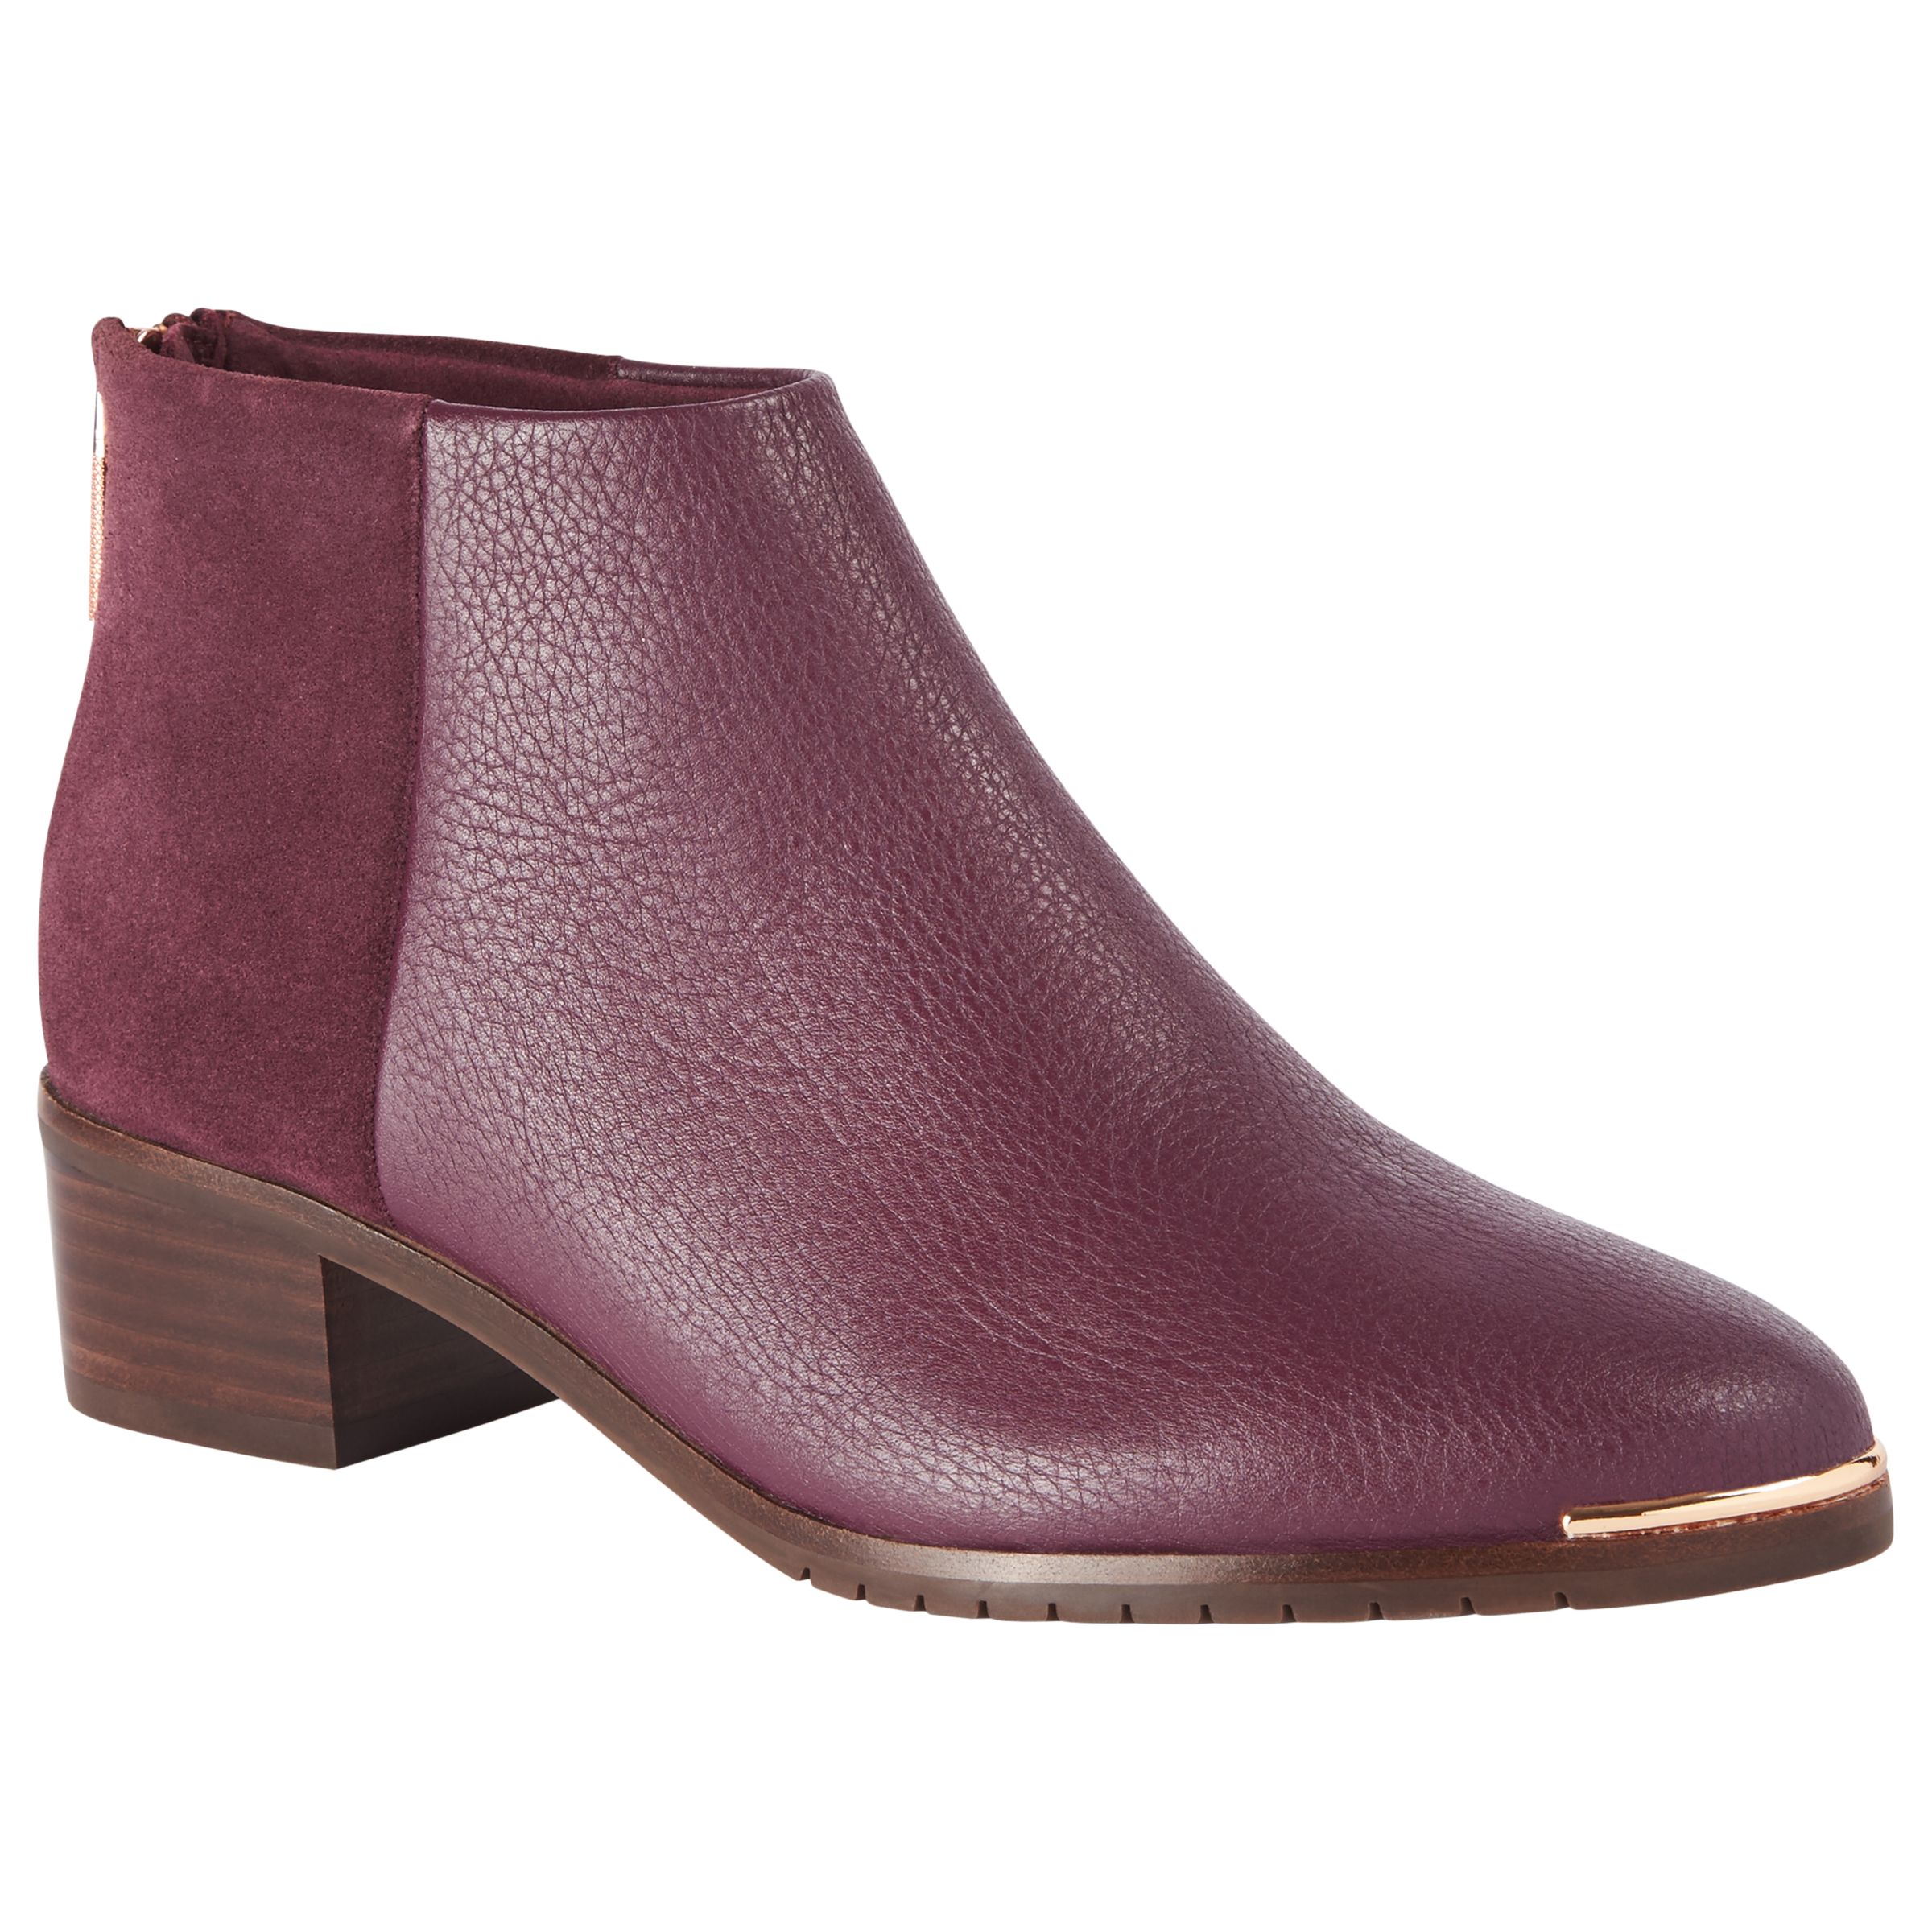 Ted Baker Sasybell Faux Fur Lined Block Heel Ankle Boots, Burgundy, 8